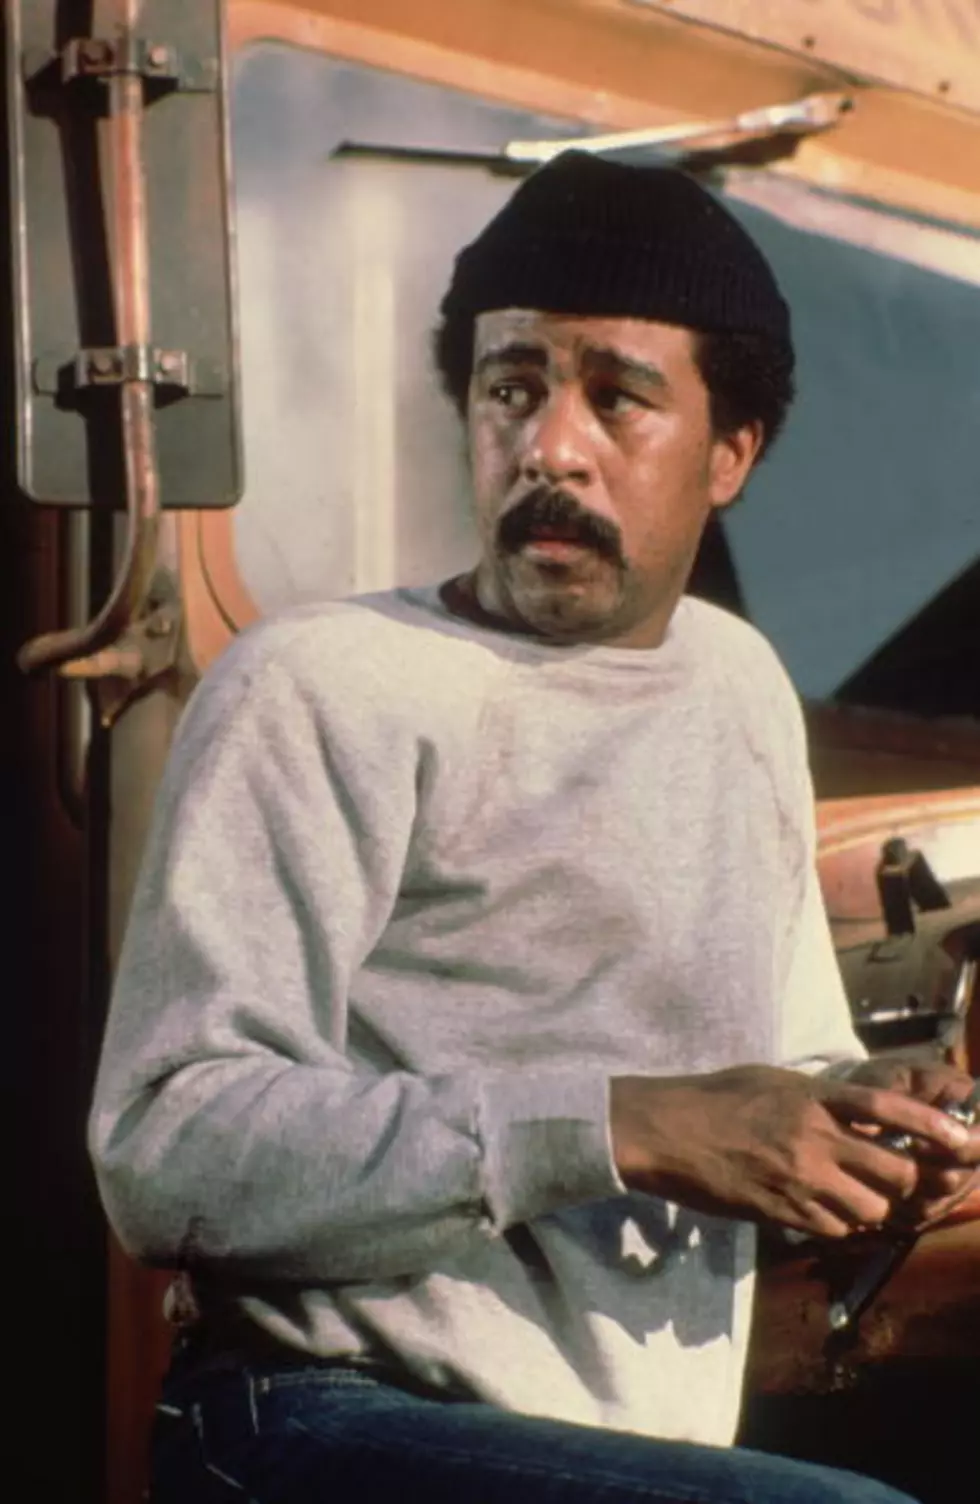 Happy Birthday to One of the Greatest Comedians of All Time, Richard Pryor